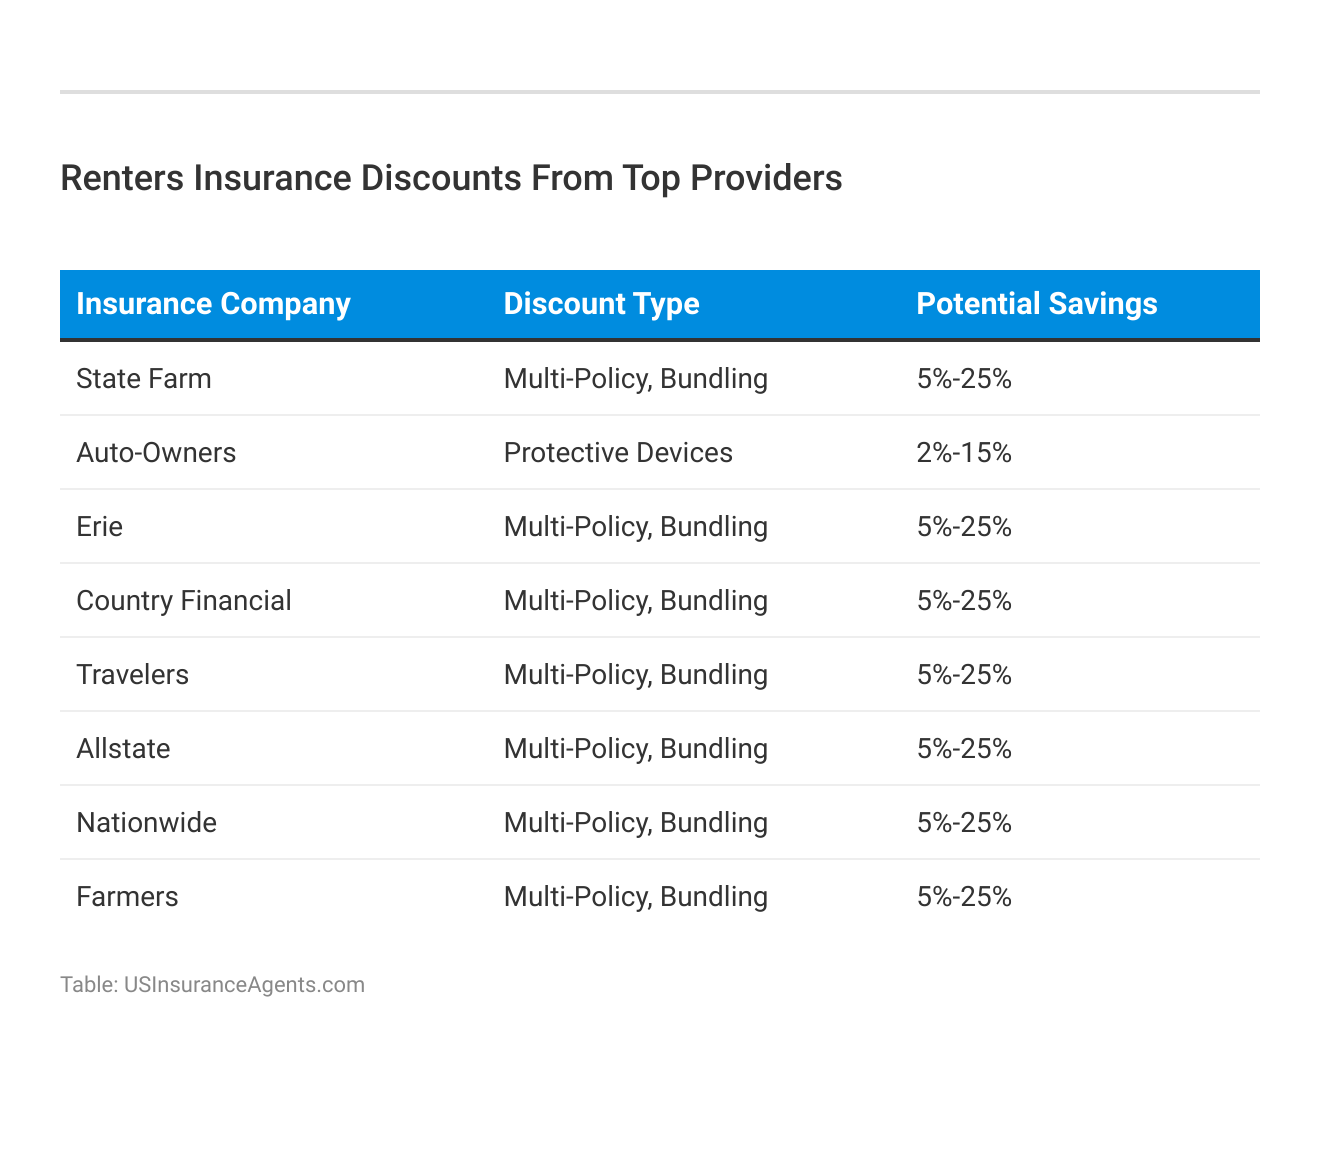 <h3>Renters Insurance Discounts From Top Providers</h3>